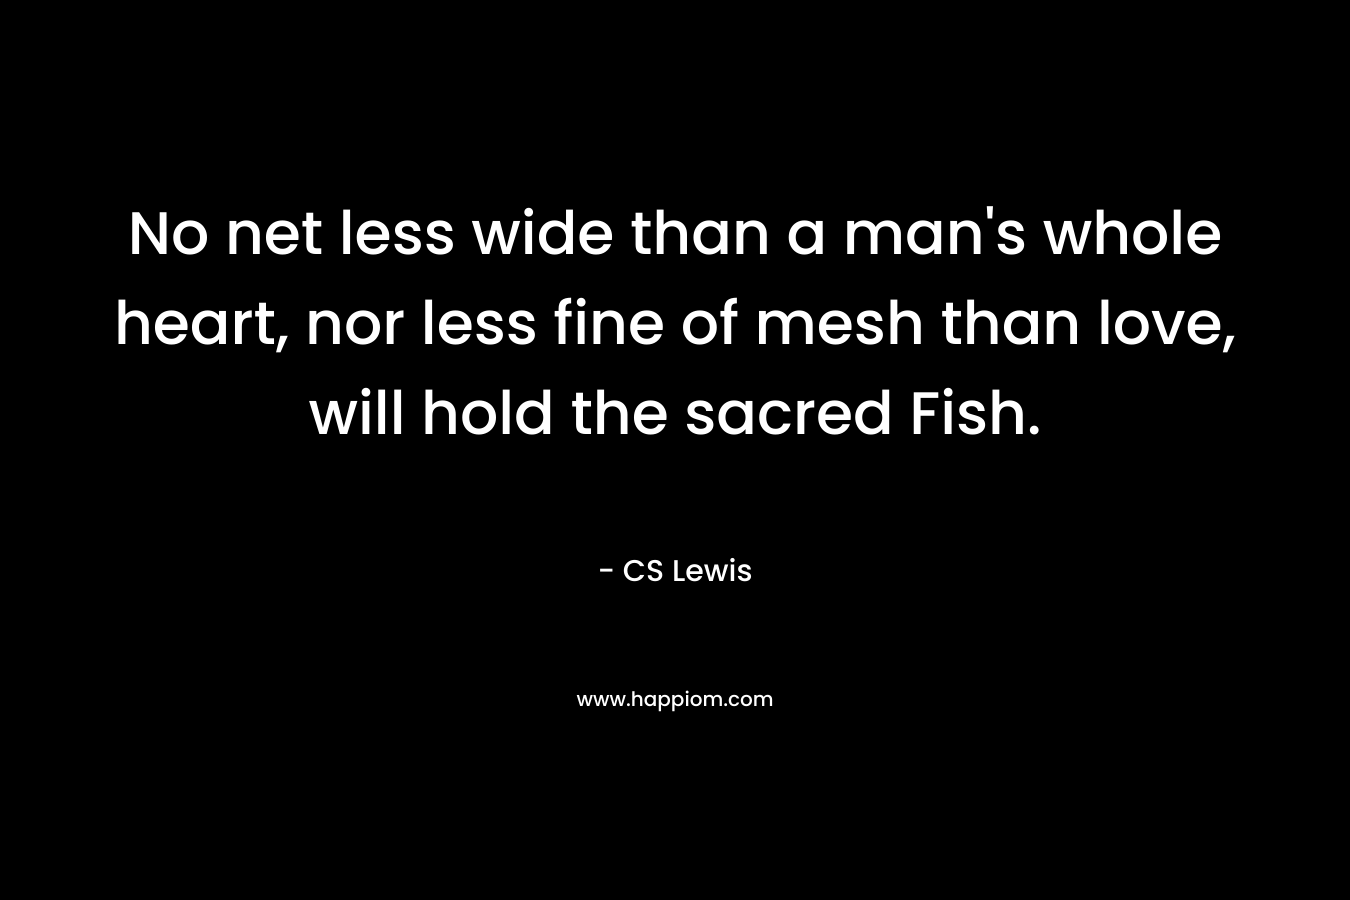 No net less wide than a man’s whole heart, nor less fine of mesh than love, will hold the sacred Fish. – CS Lewis